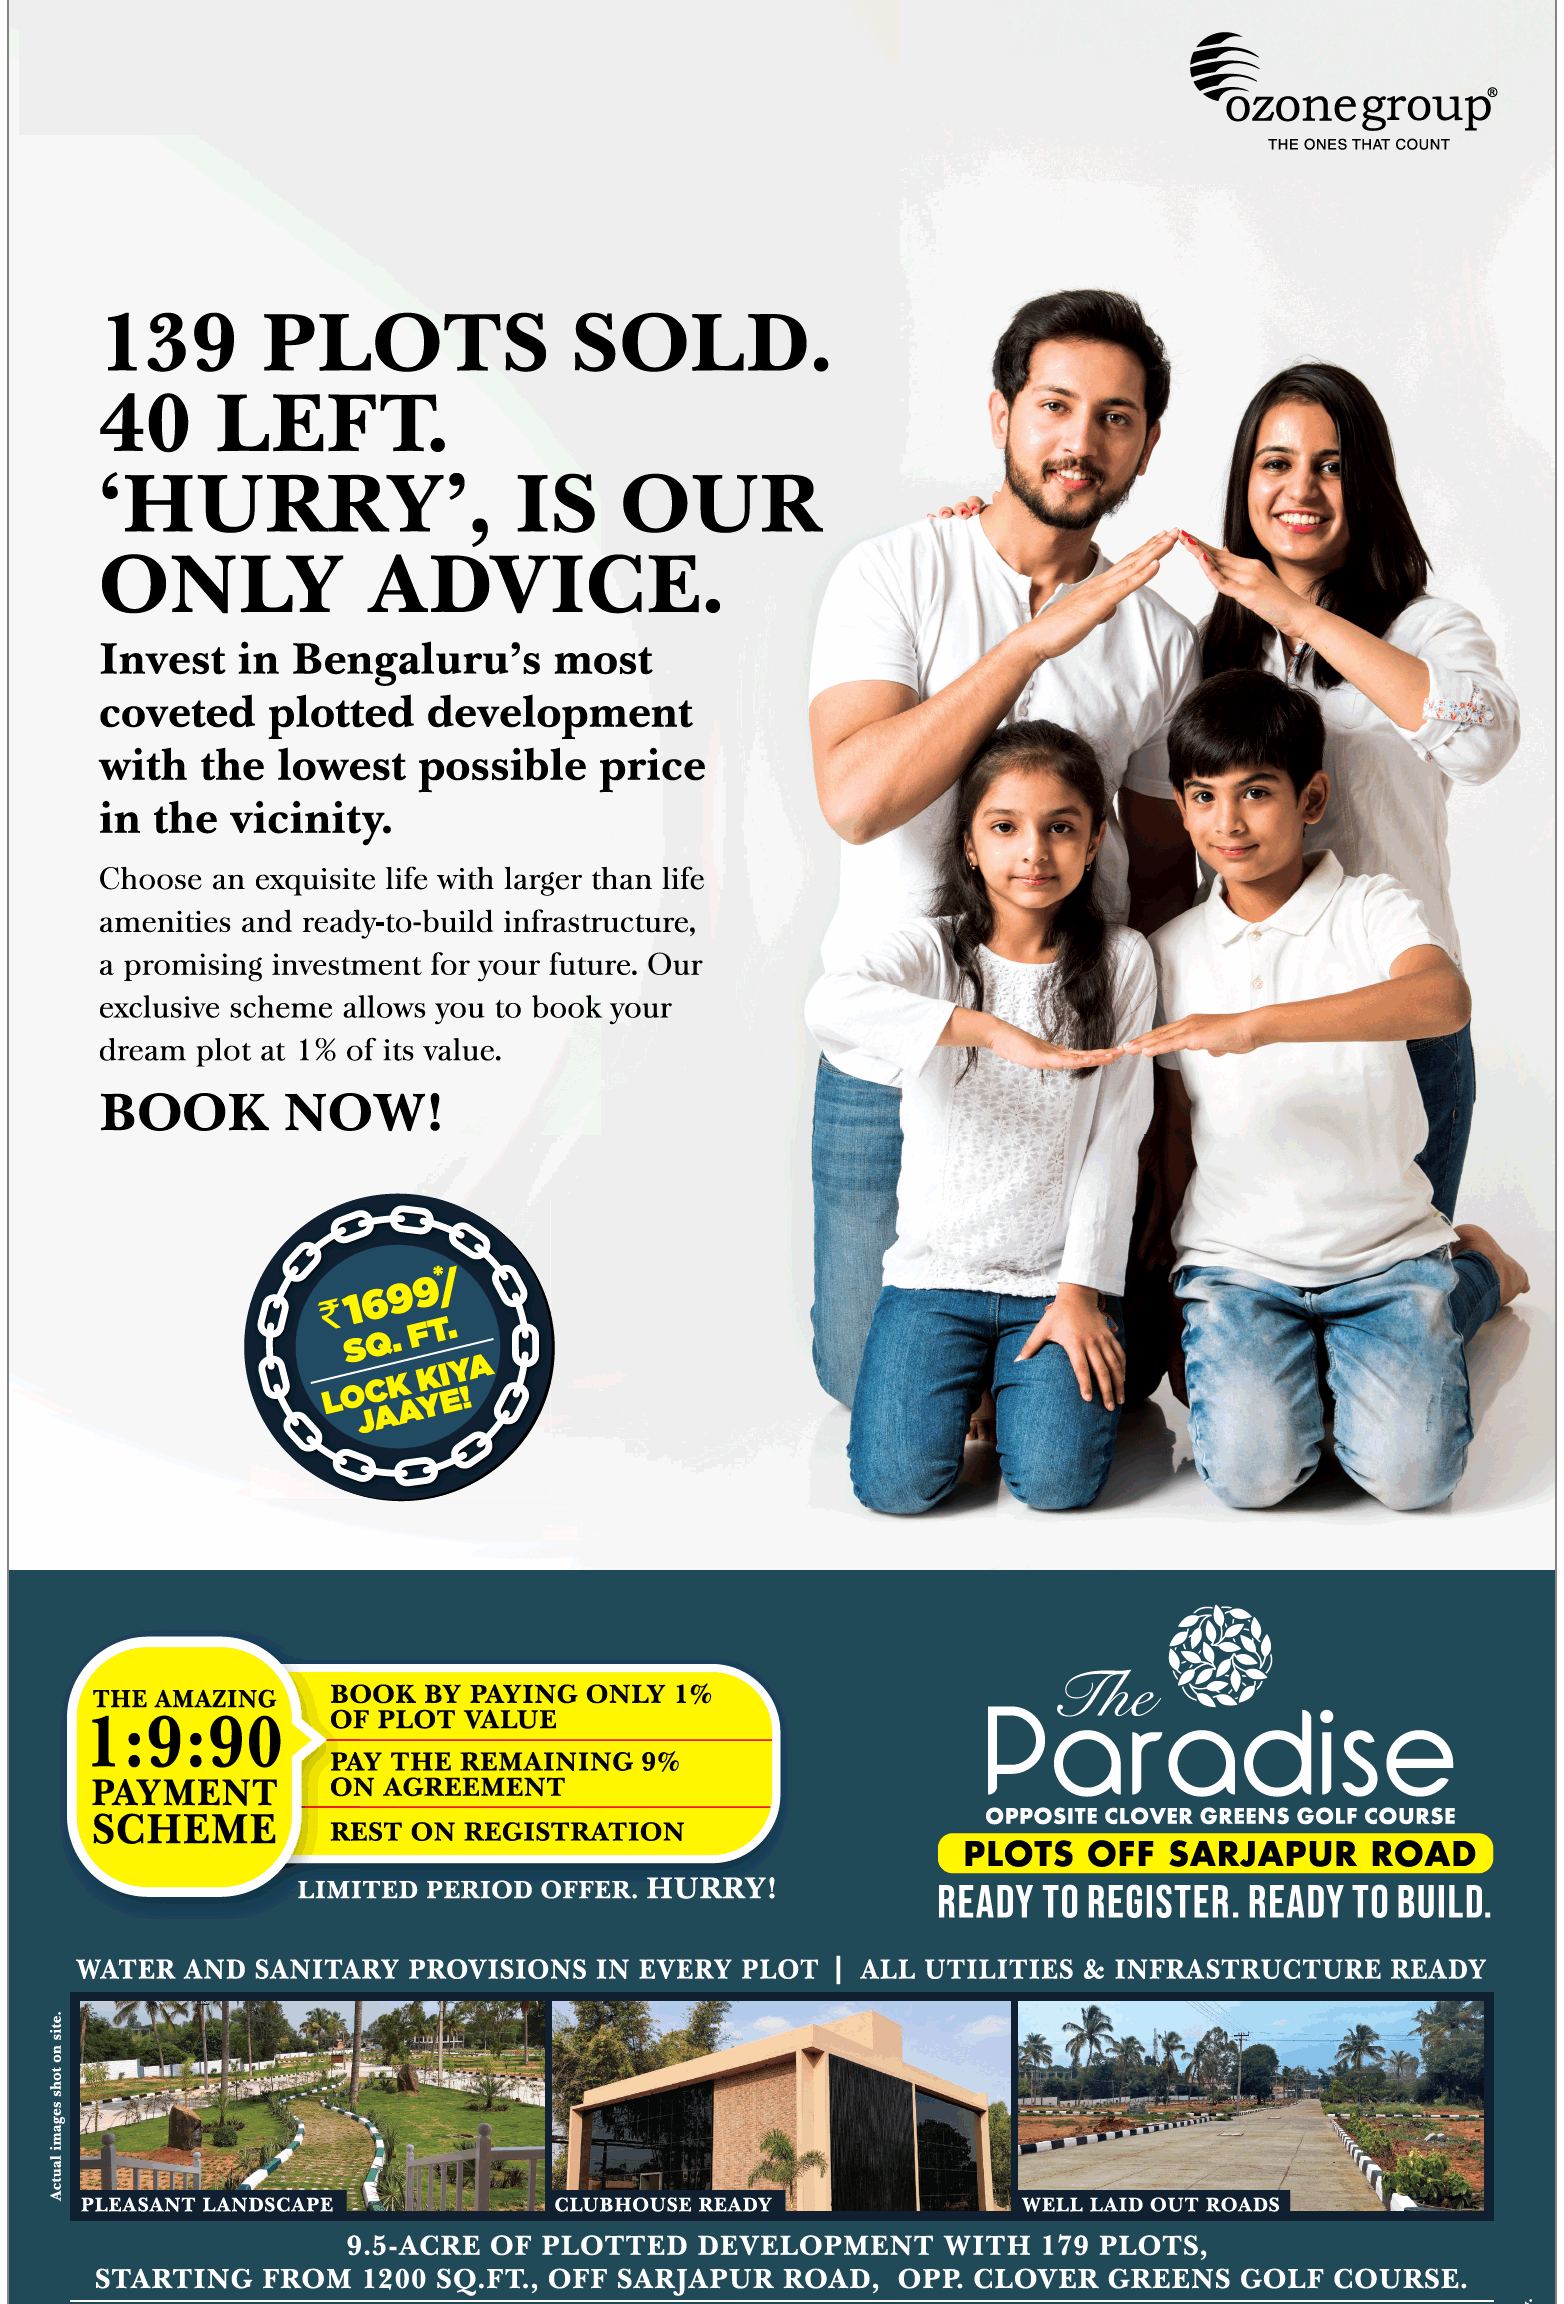 The amazing 1:9:90 payment scheme at Ozone The Paradise in Bangalore